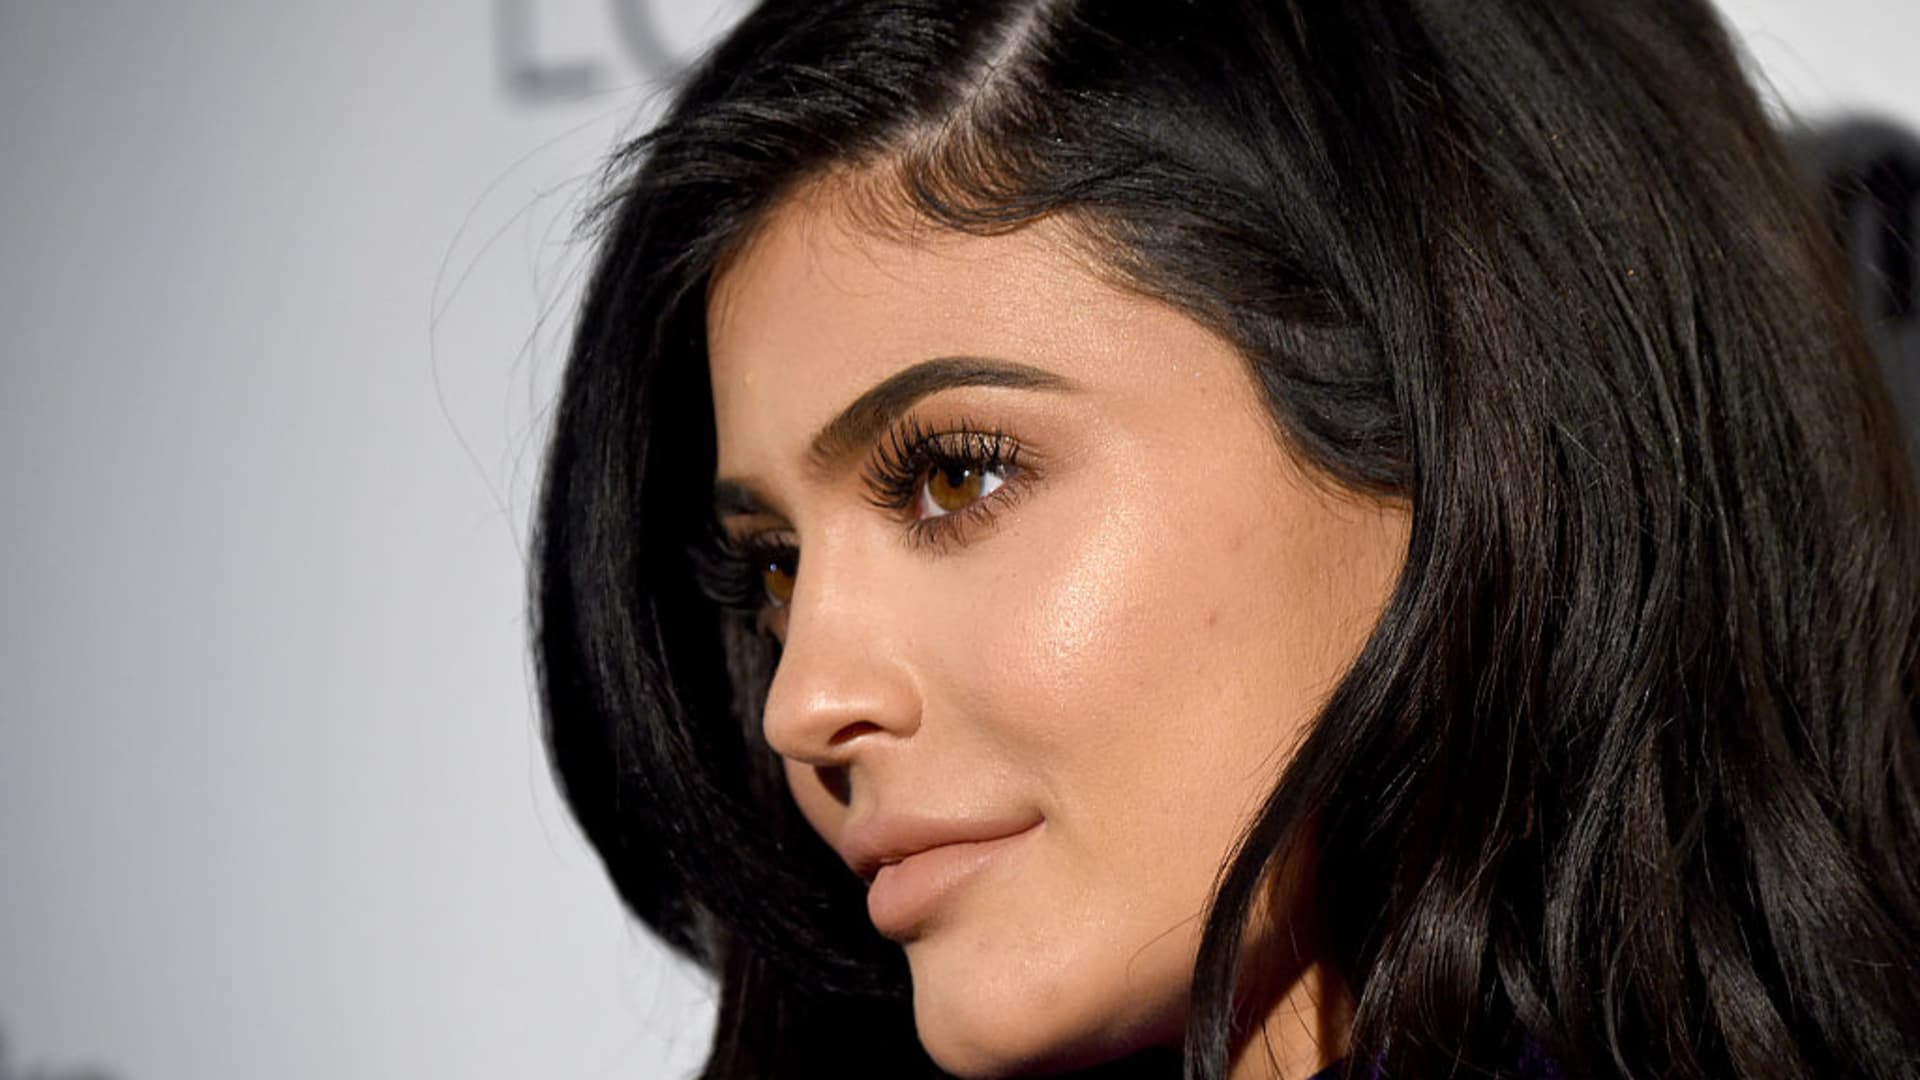 Kylie Jenner's Khy clothing line made $1M in first hour on launch day